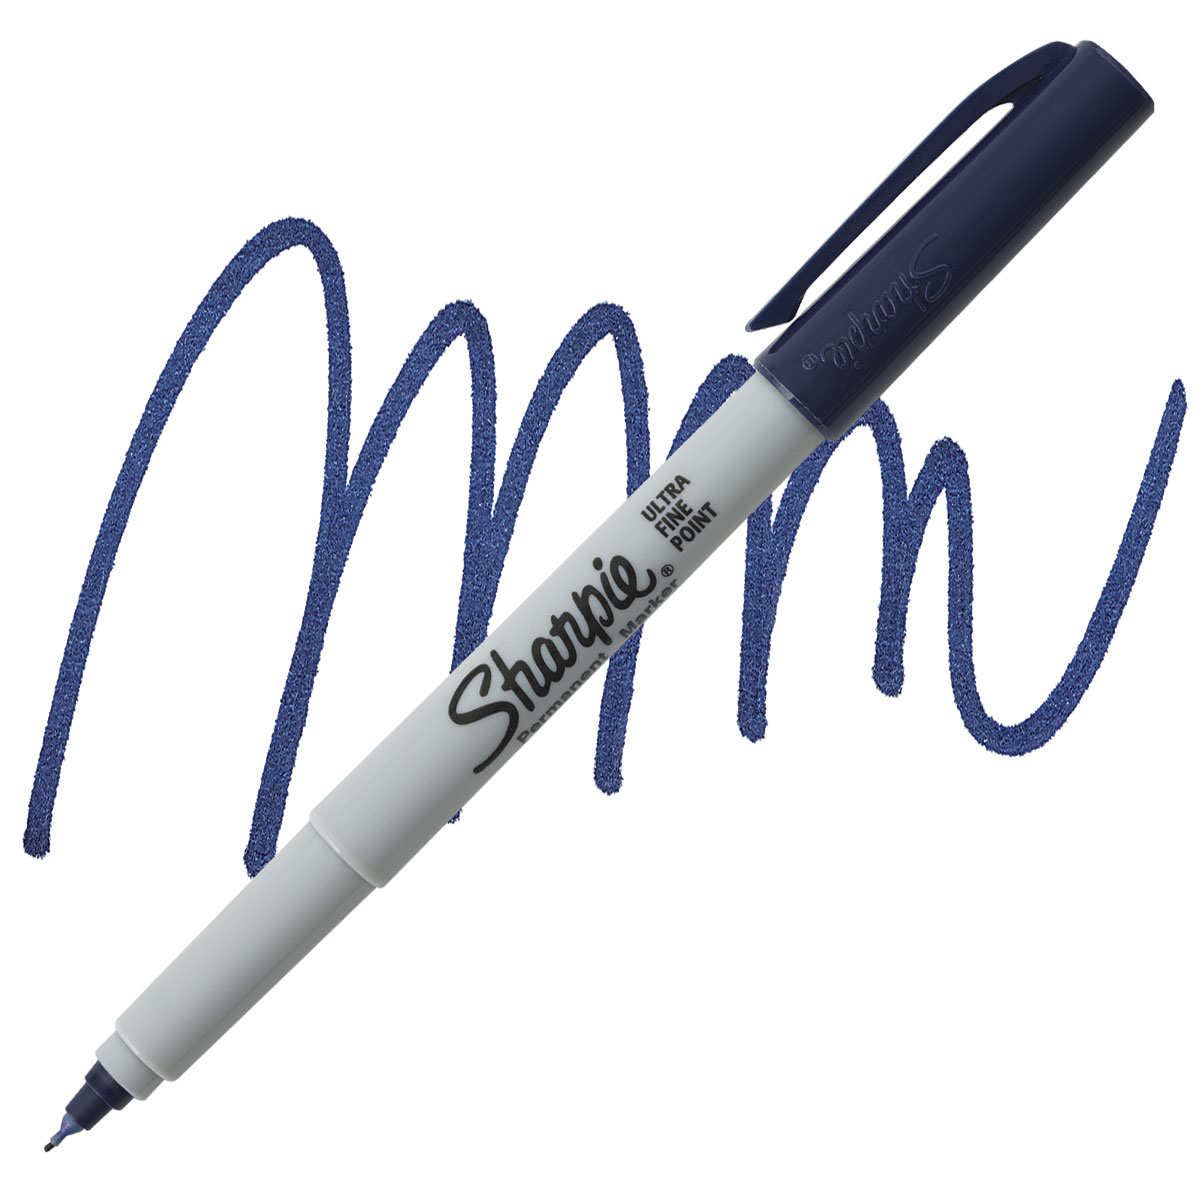 Cox Hardware and Lumber - Ultra Fine Point Sharpie Black